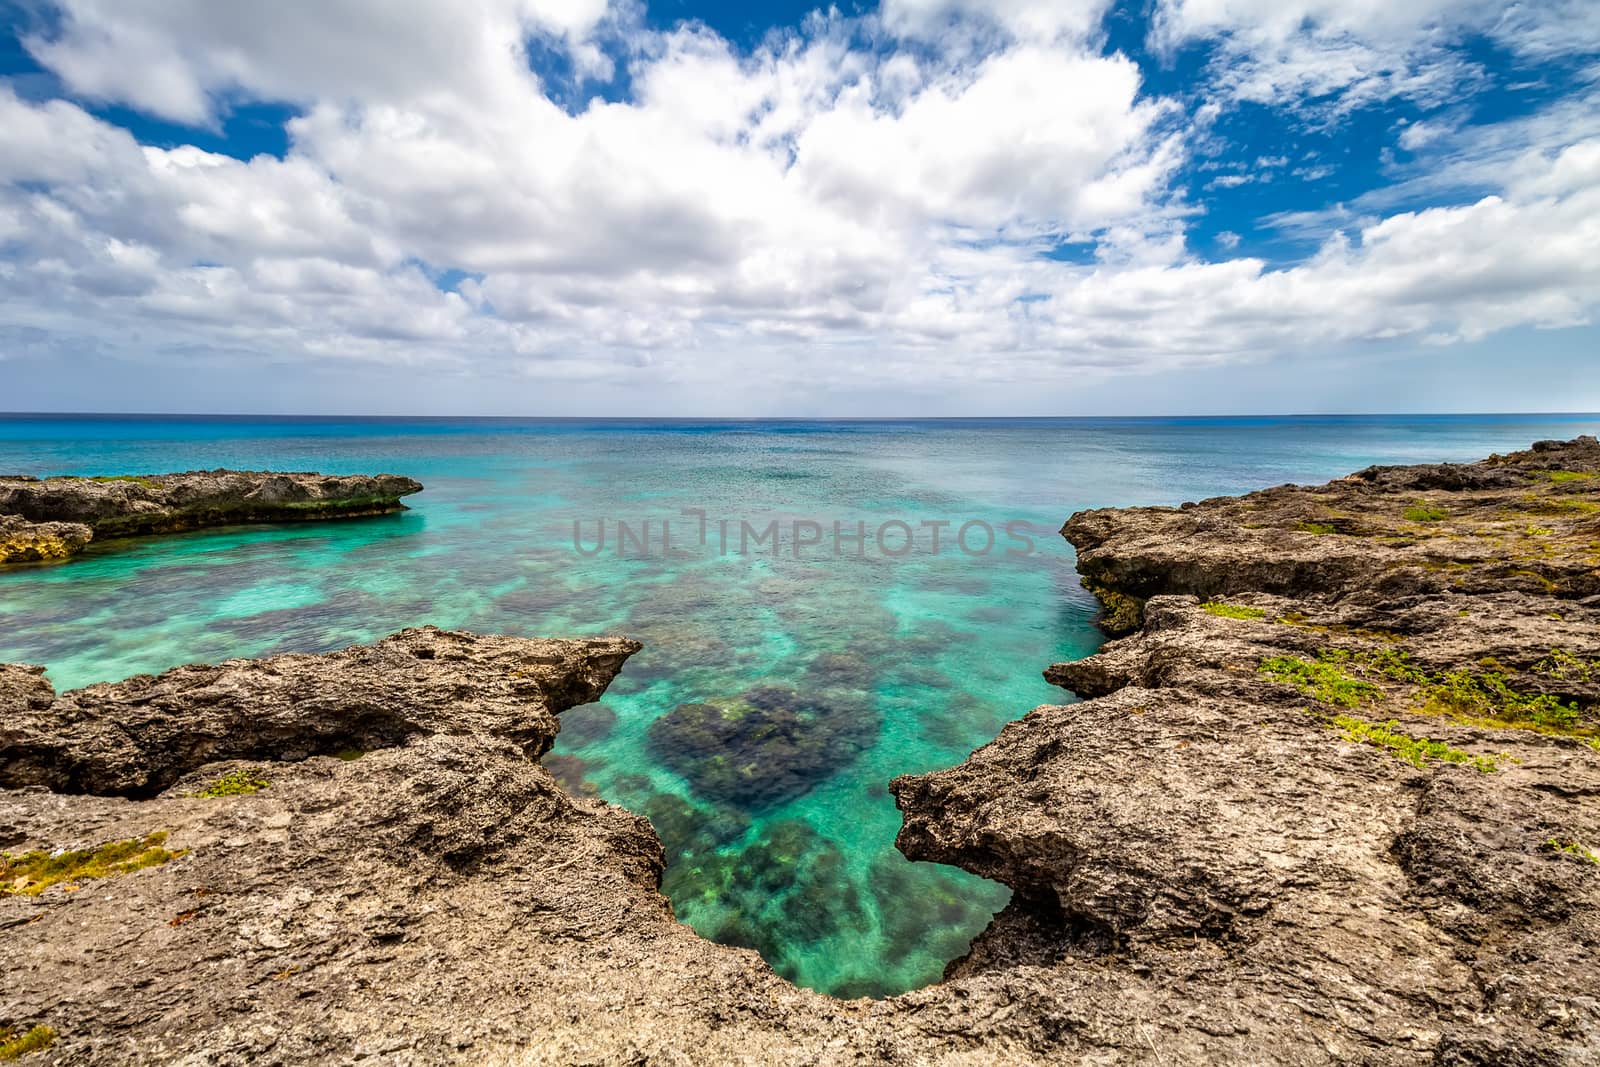 Background view of shallow turquoise waters with coral reefs underneath the surface and fringing reefs encircling it above the surface. Clear horizon